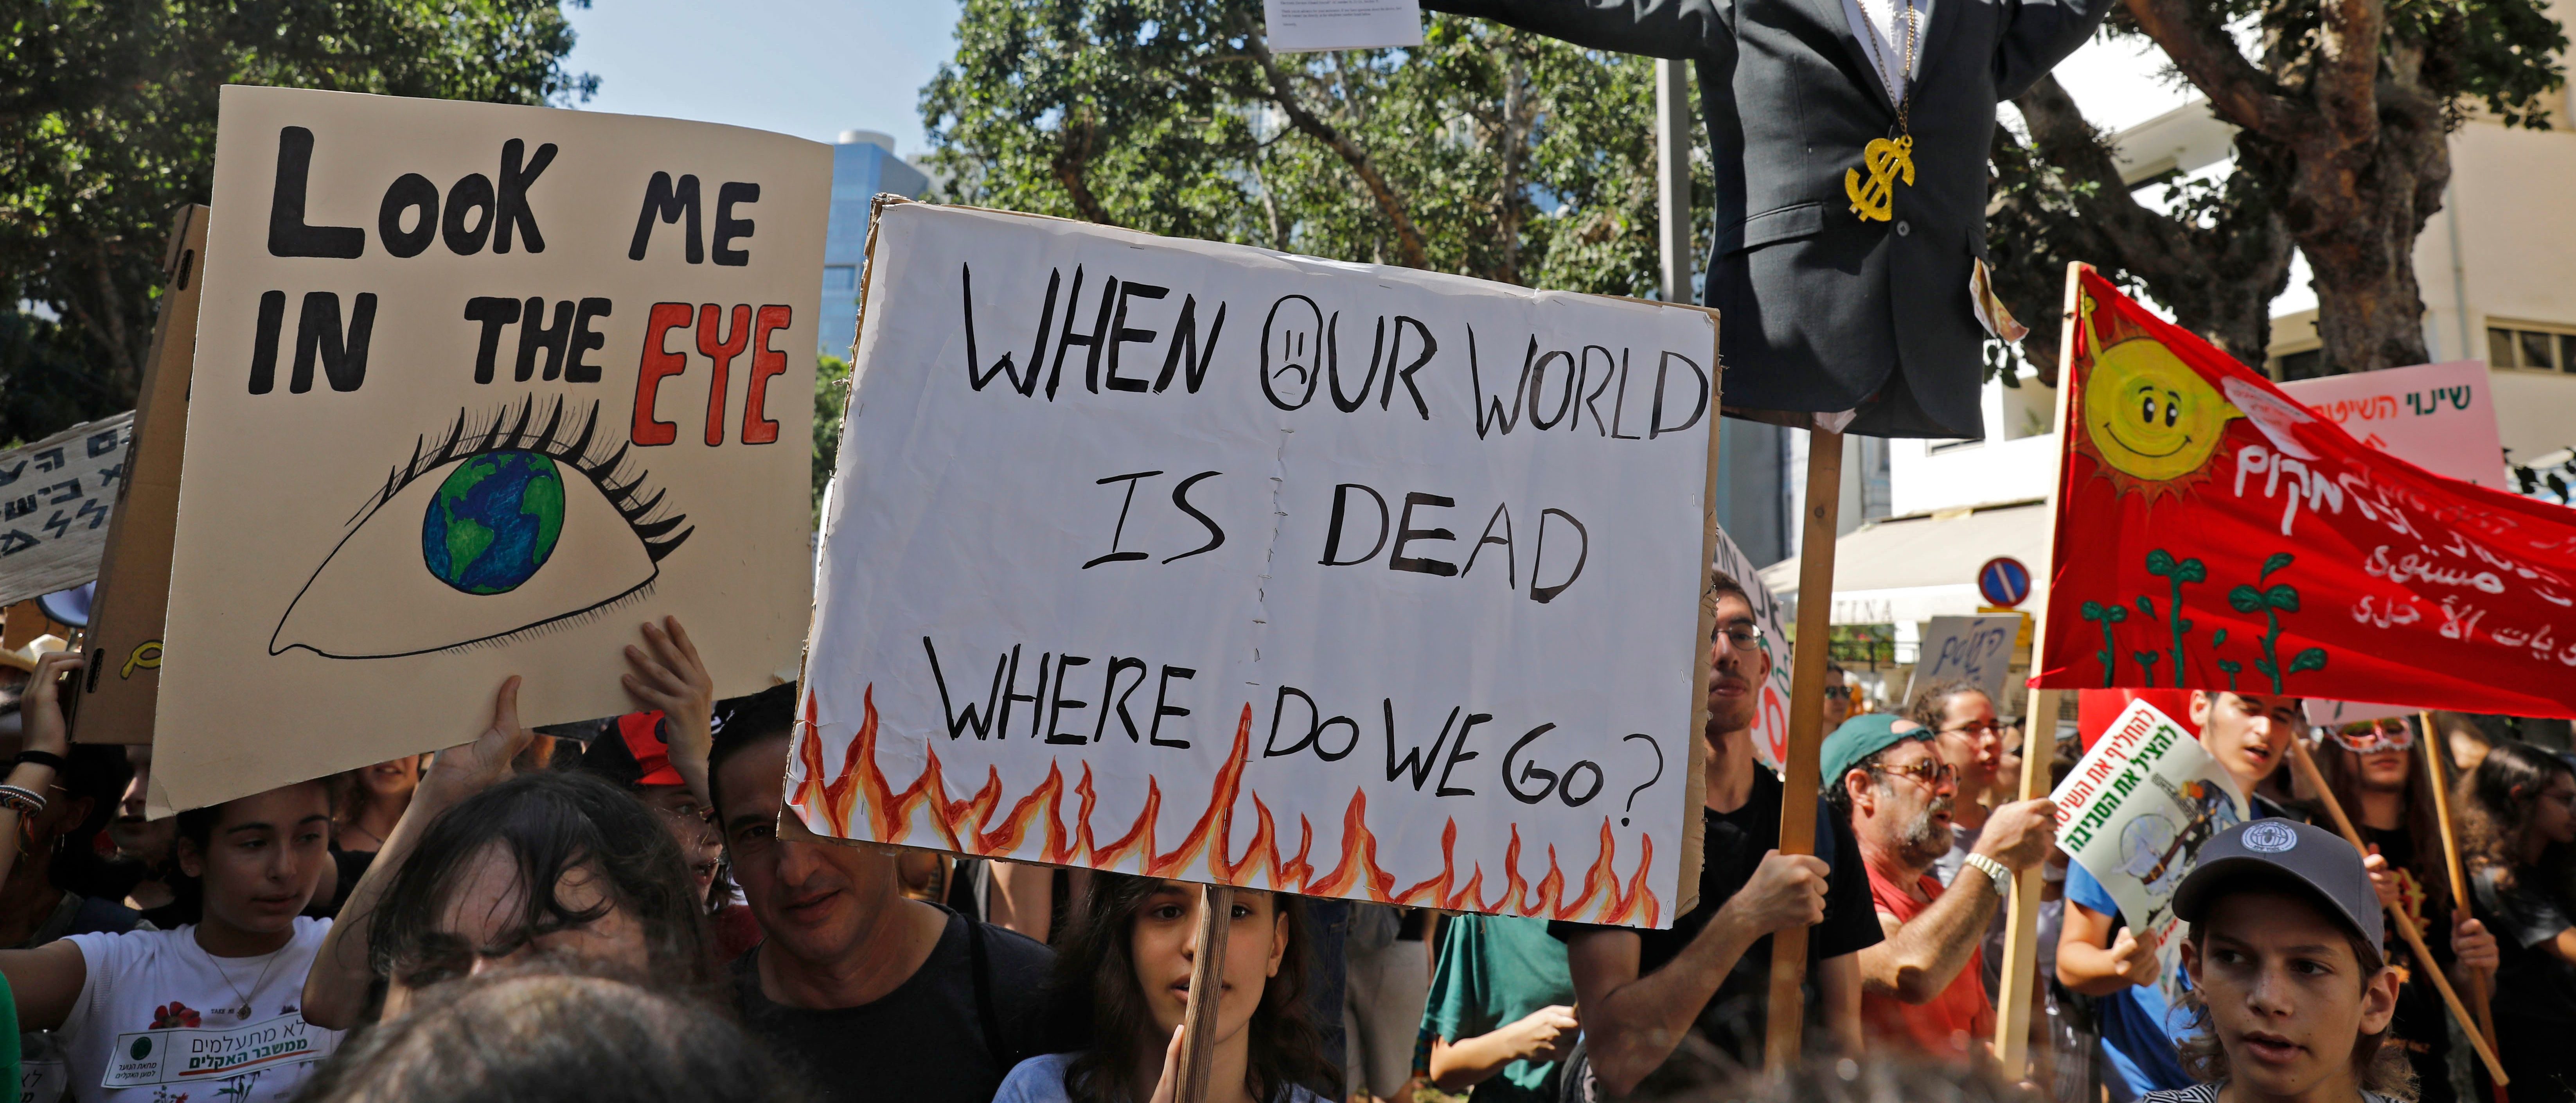 Israeli activists and demonstrators hold placards as they take part in a Global Climate Strike in the Israeli coastal city of Tel Aviv on September 27, 2019 against inaction on climate change. (AHMAD GHARABLI/AFP/Getty Images)